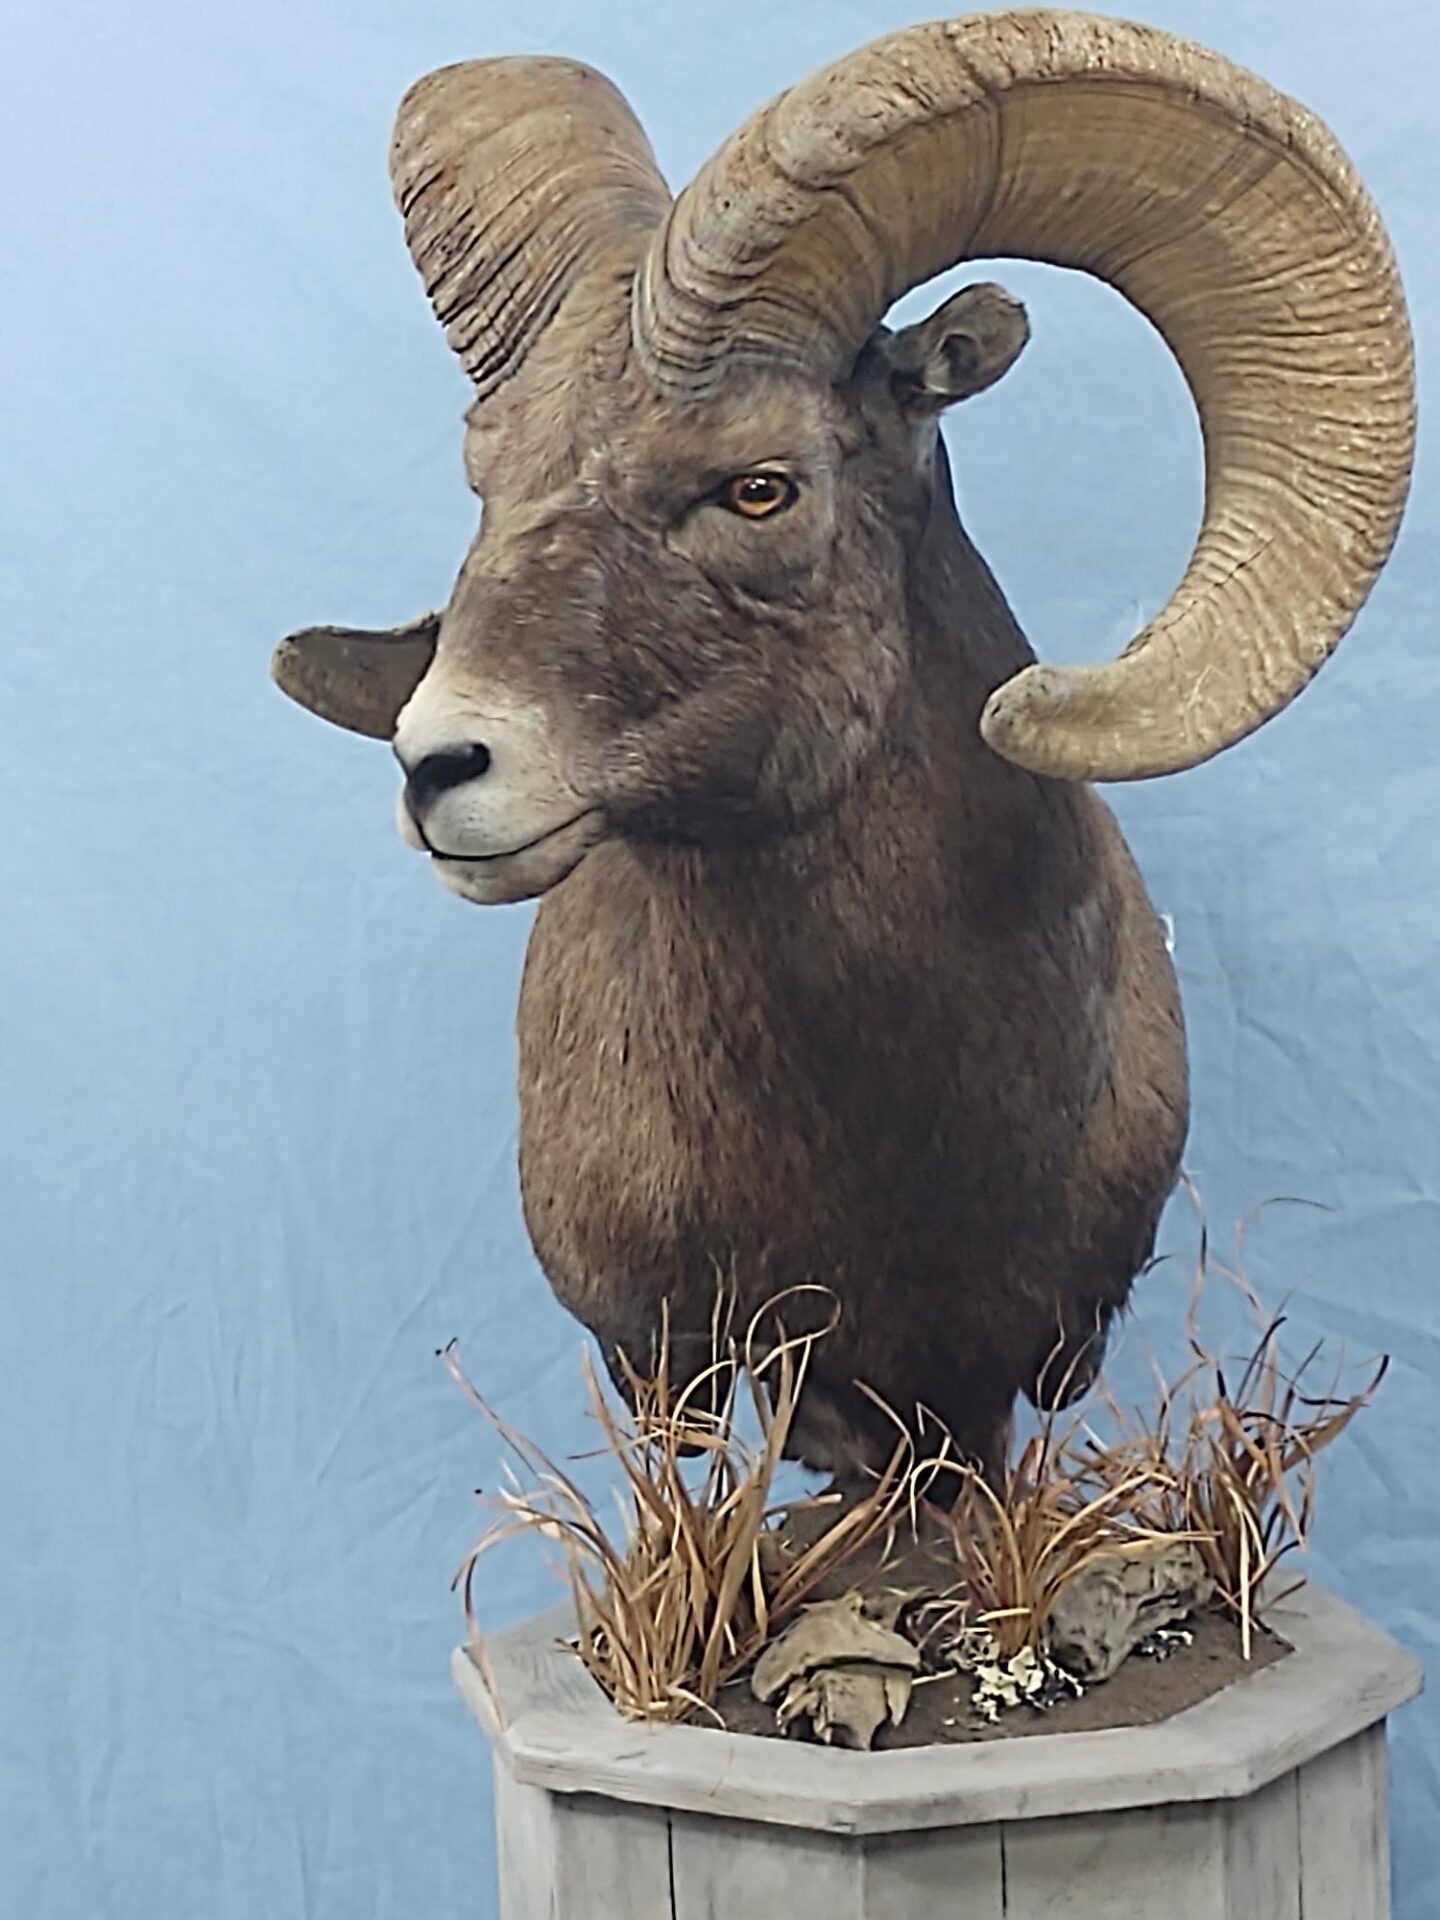 Sheep Taxidermy on display at Anderson Taxidermy